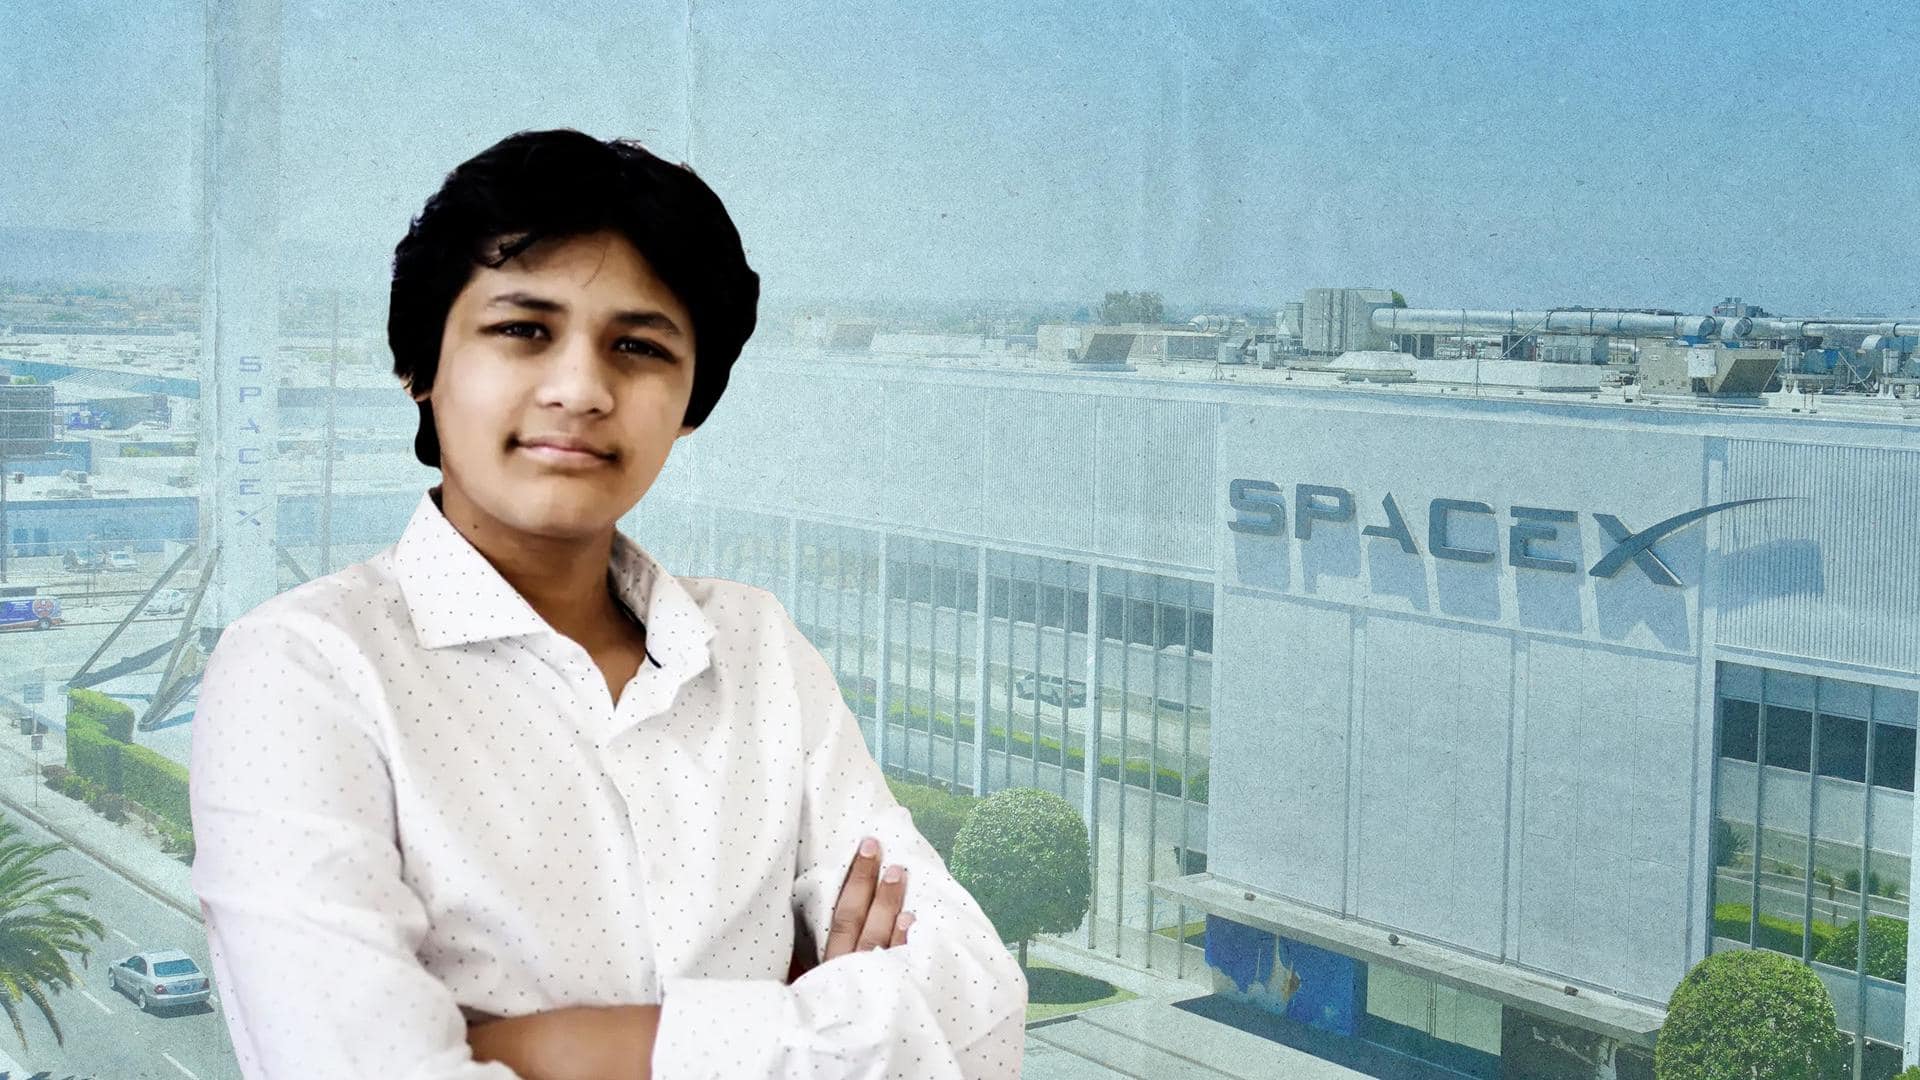 14-year-old joins Musk's SpaceX, becomes youngest employee